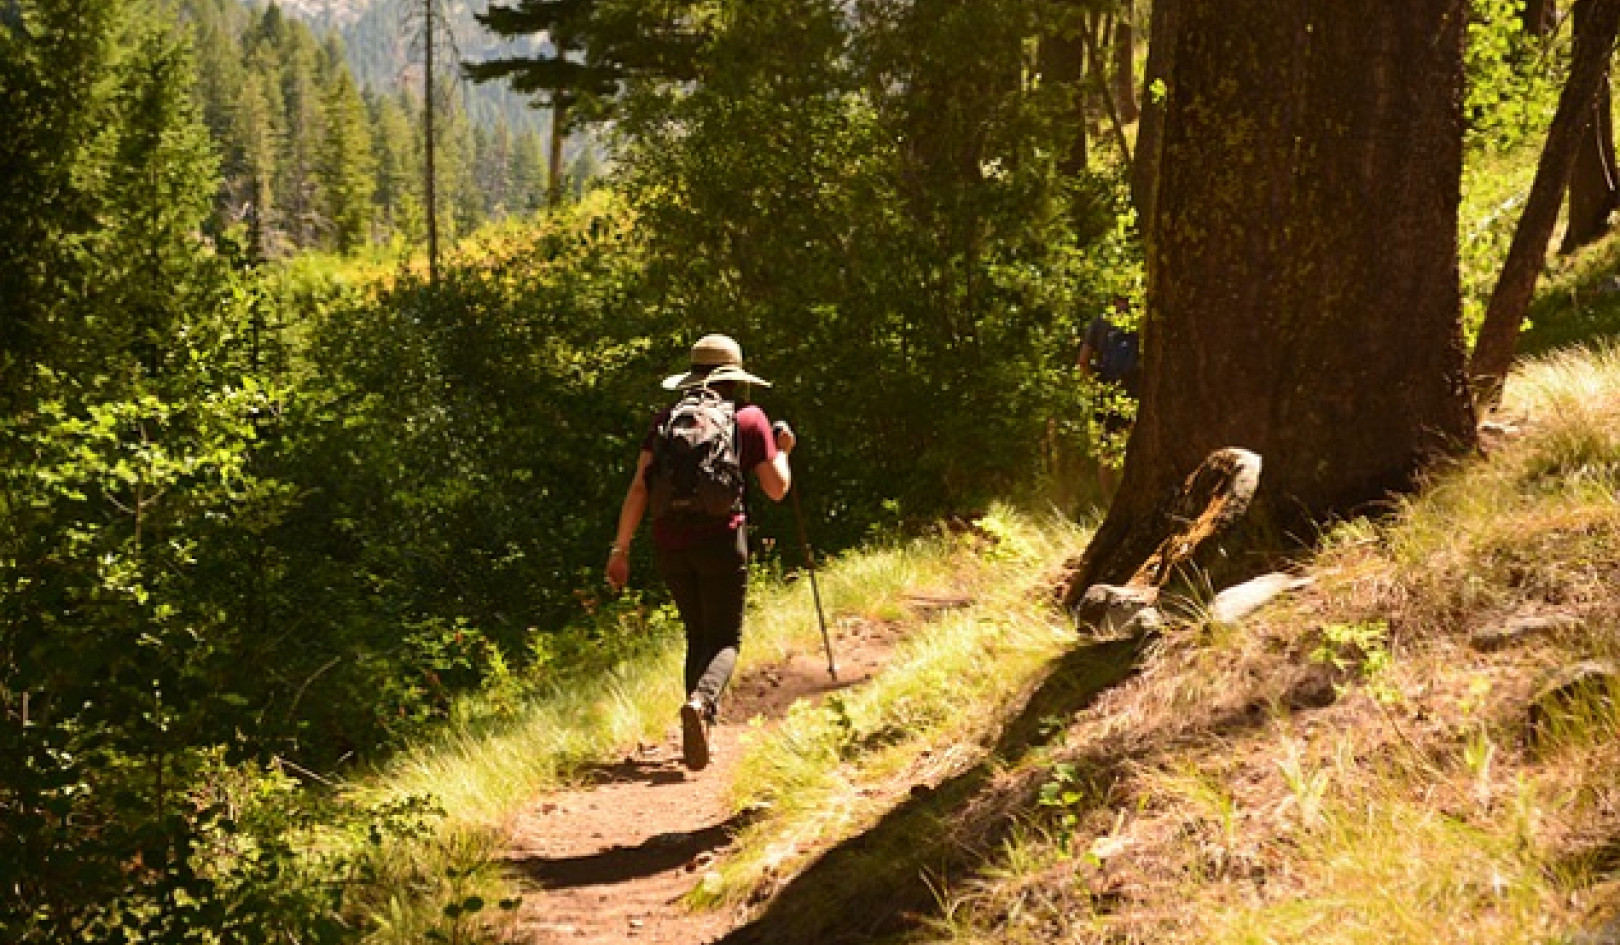 Take a Hike and Experience the Trail of Your Life